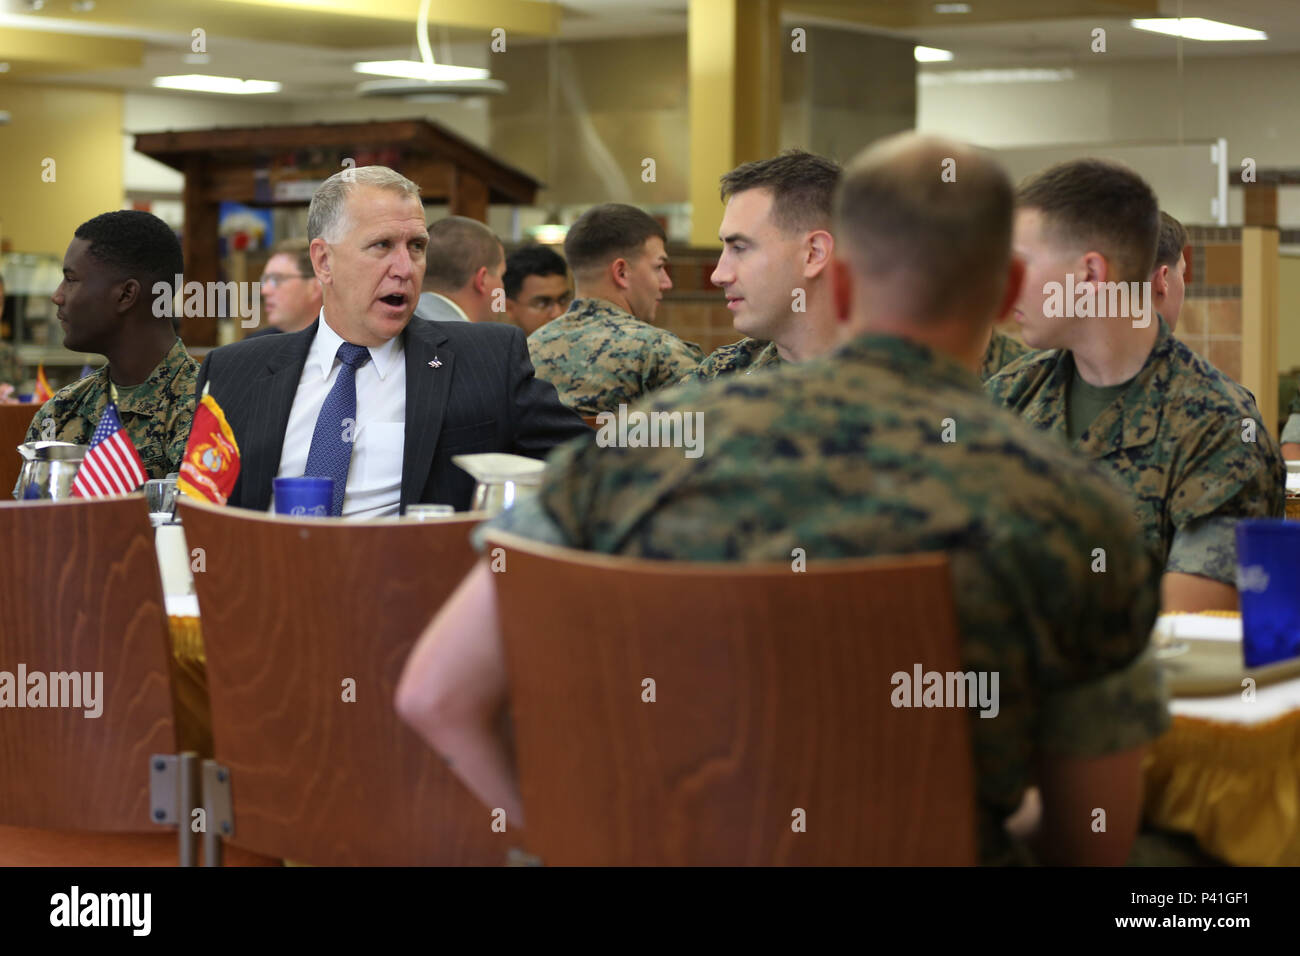 Sen. Thom Tillis, left, shares a meal with Marines at the mess hall during a visit at Marine Corps Air Station Cherry Point, N.C., June 1, 2016. Tillis visited the air station to address the needs and priorities of the base, and assess the Marine Corps’ presence in North Carolina. Tillis also toured Fleet Readiness Center East. Tillis is a North Carolina senator. (U.S. Marine Corps photo by Lance Cpl. Mackenzie Gibson/Released) Stock Photo